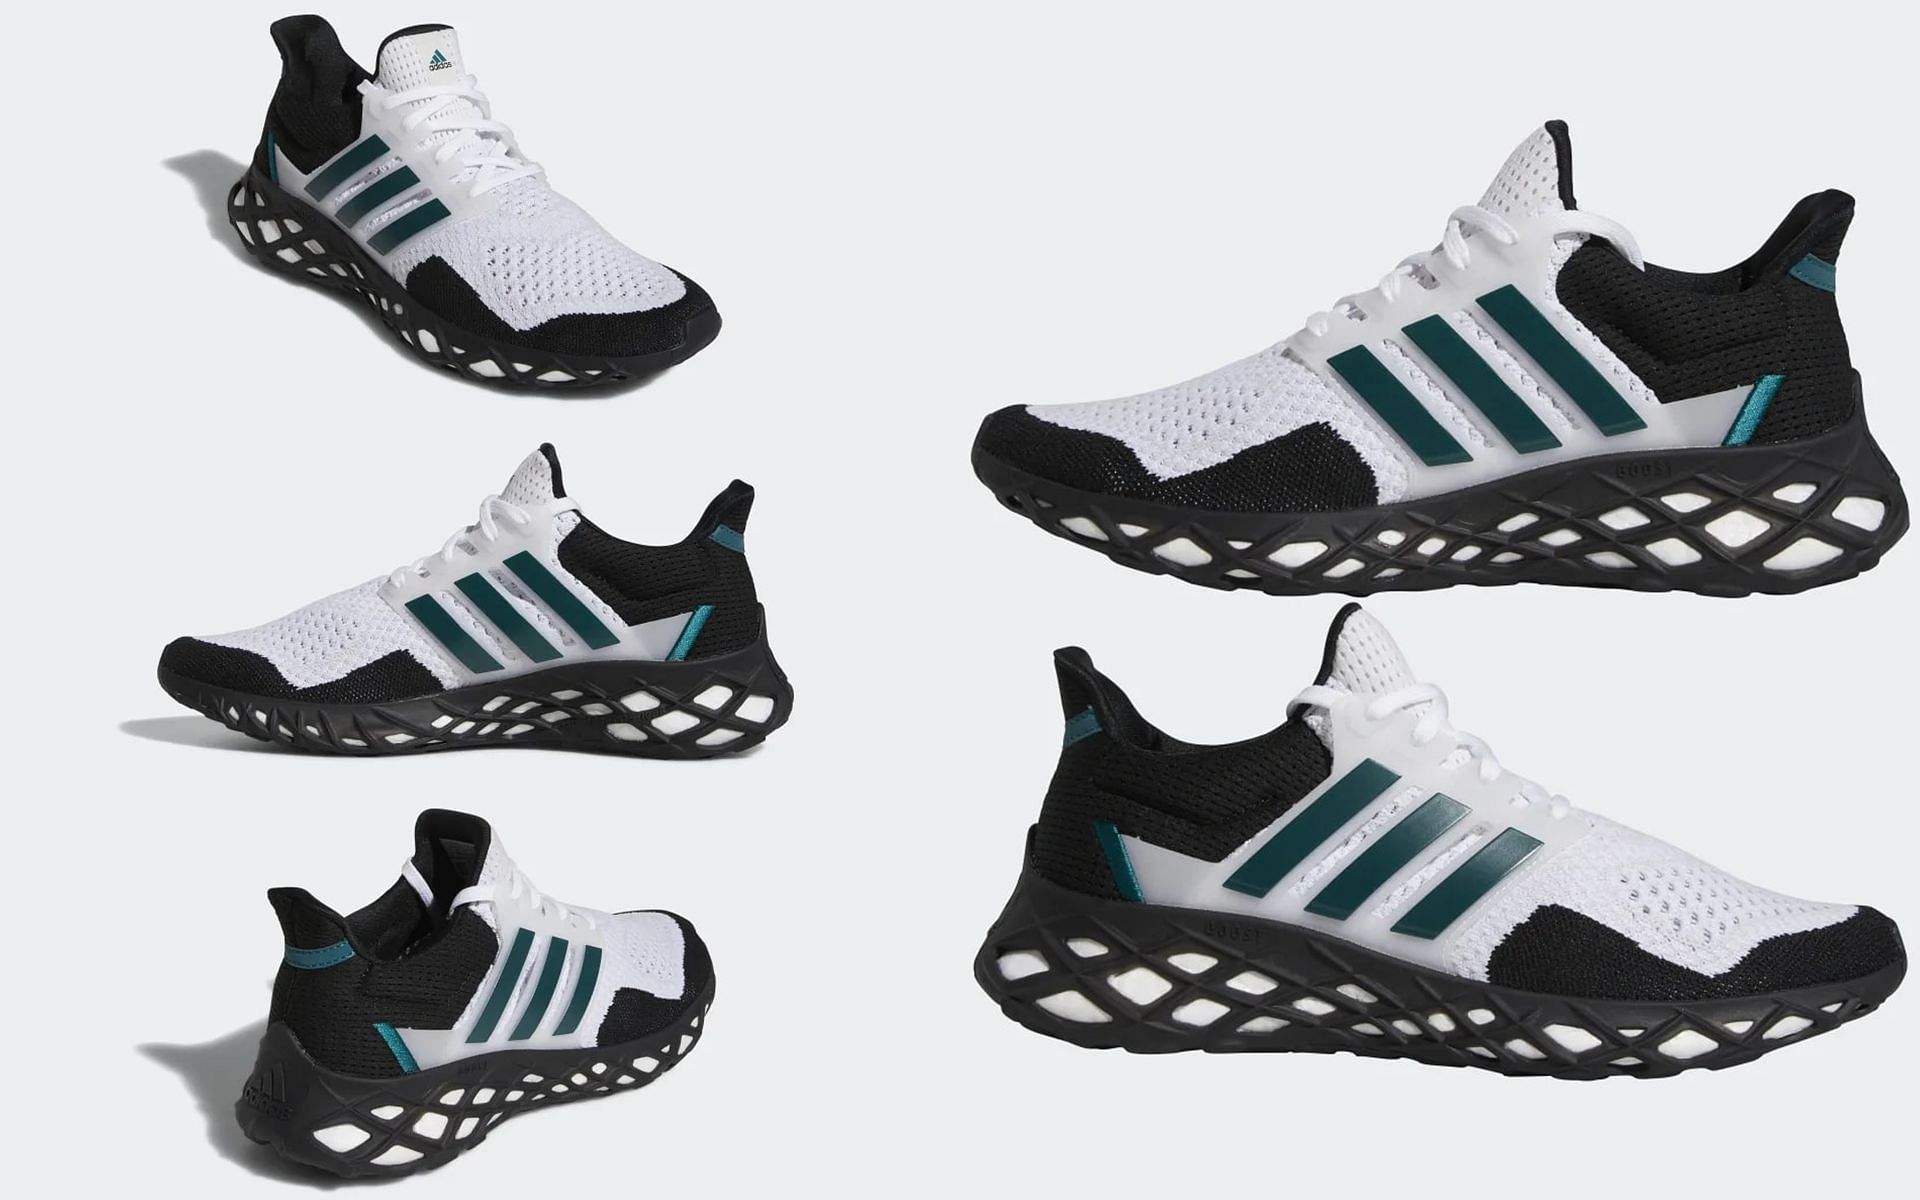 Adidas UltraBOOST Web DNA: Release date, price, and more about the new ...